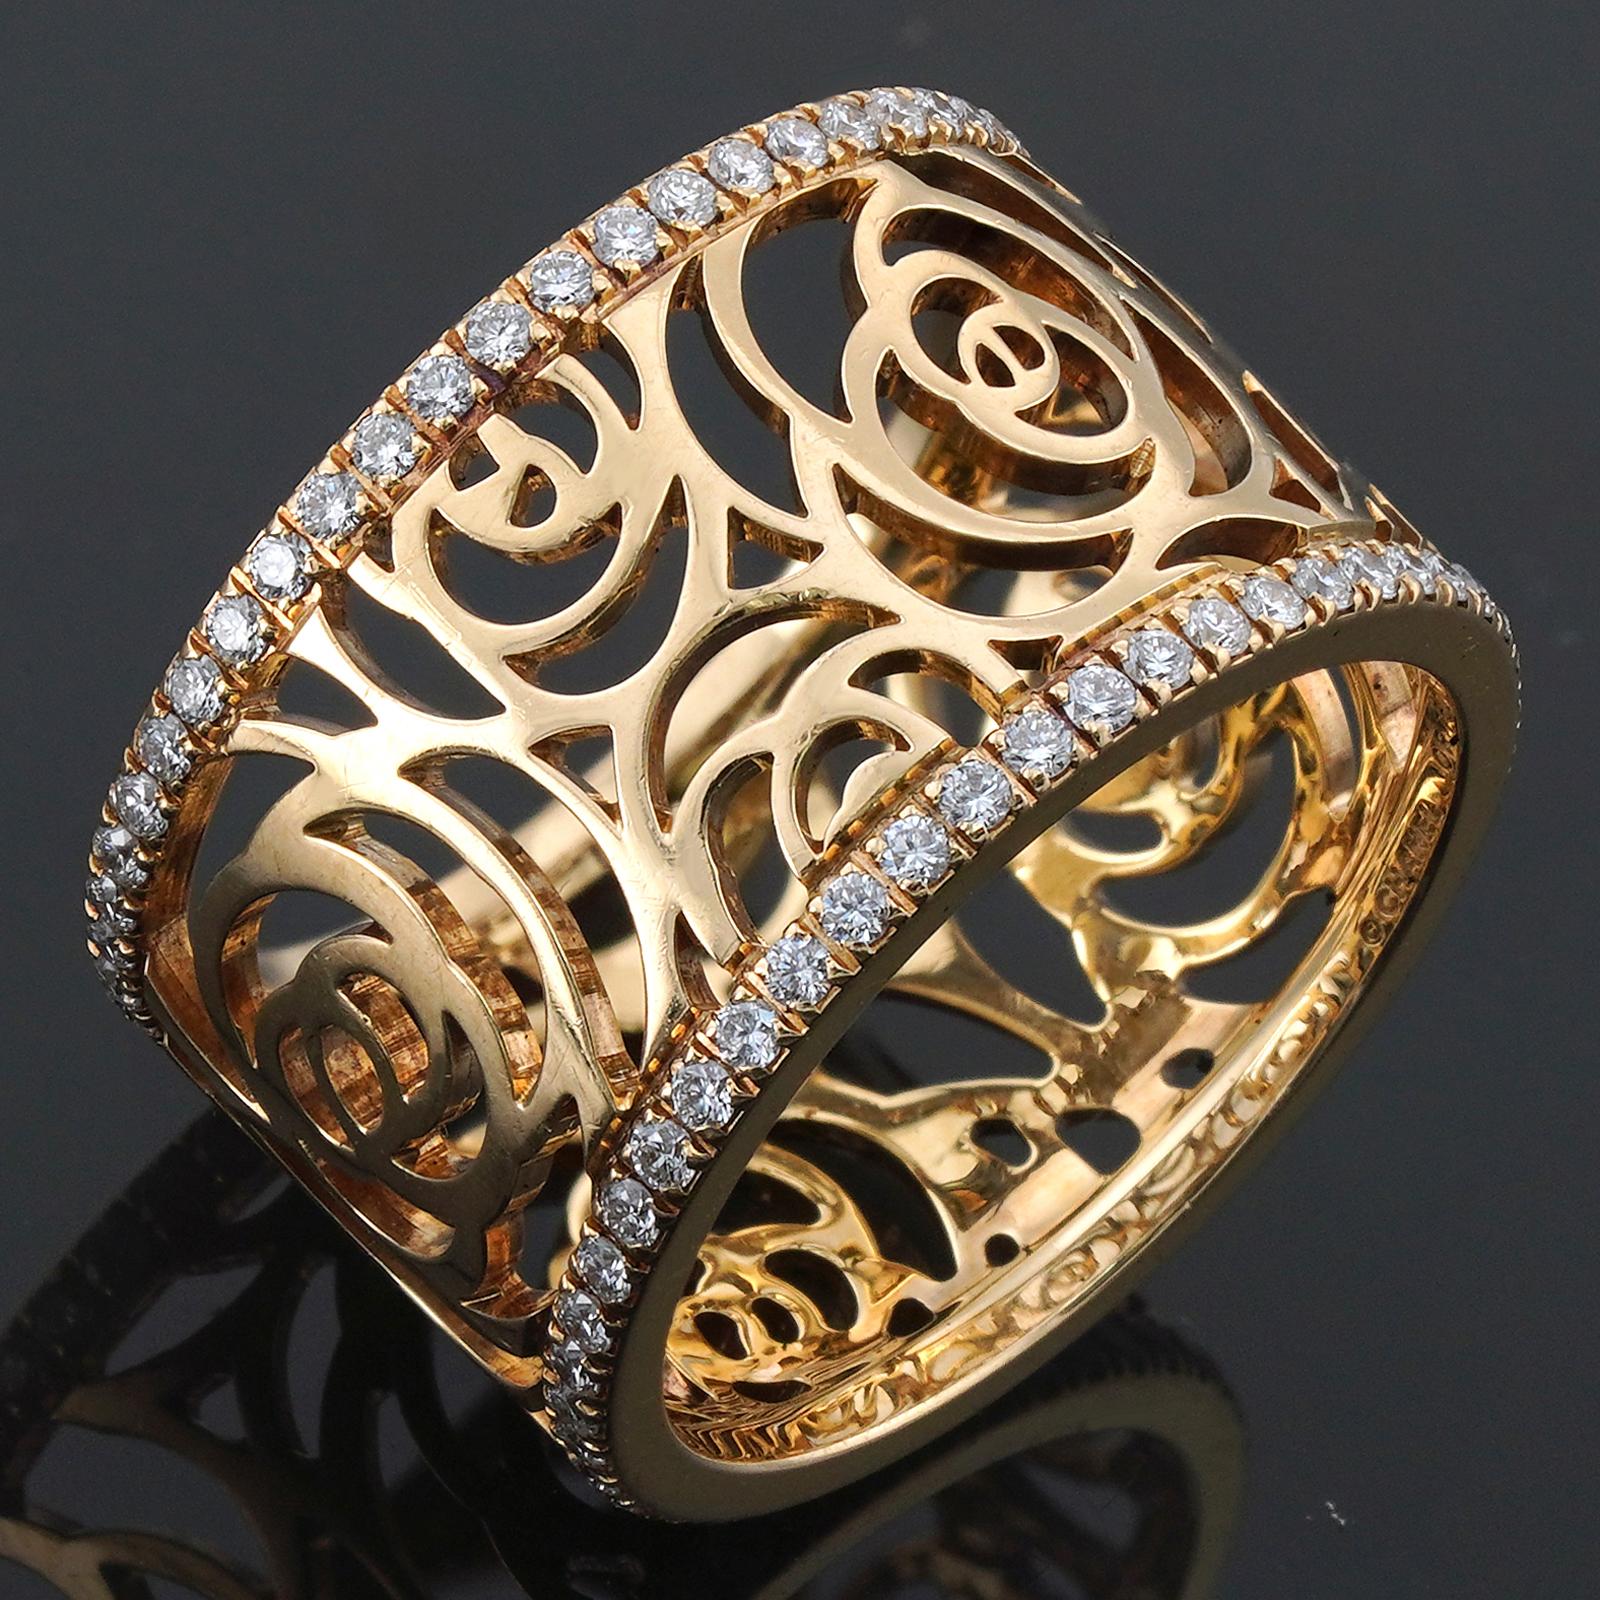 This splendid Chanel band from the elegant Camelia Ajoure Rose collection features the iconic floral openwork design crafted in 18k yellow gold and accented with round brilliant D-E-F diamonds. Made in France circa 2010s. Measurements: 0.38